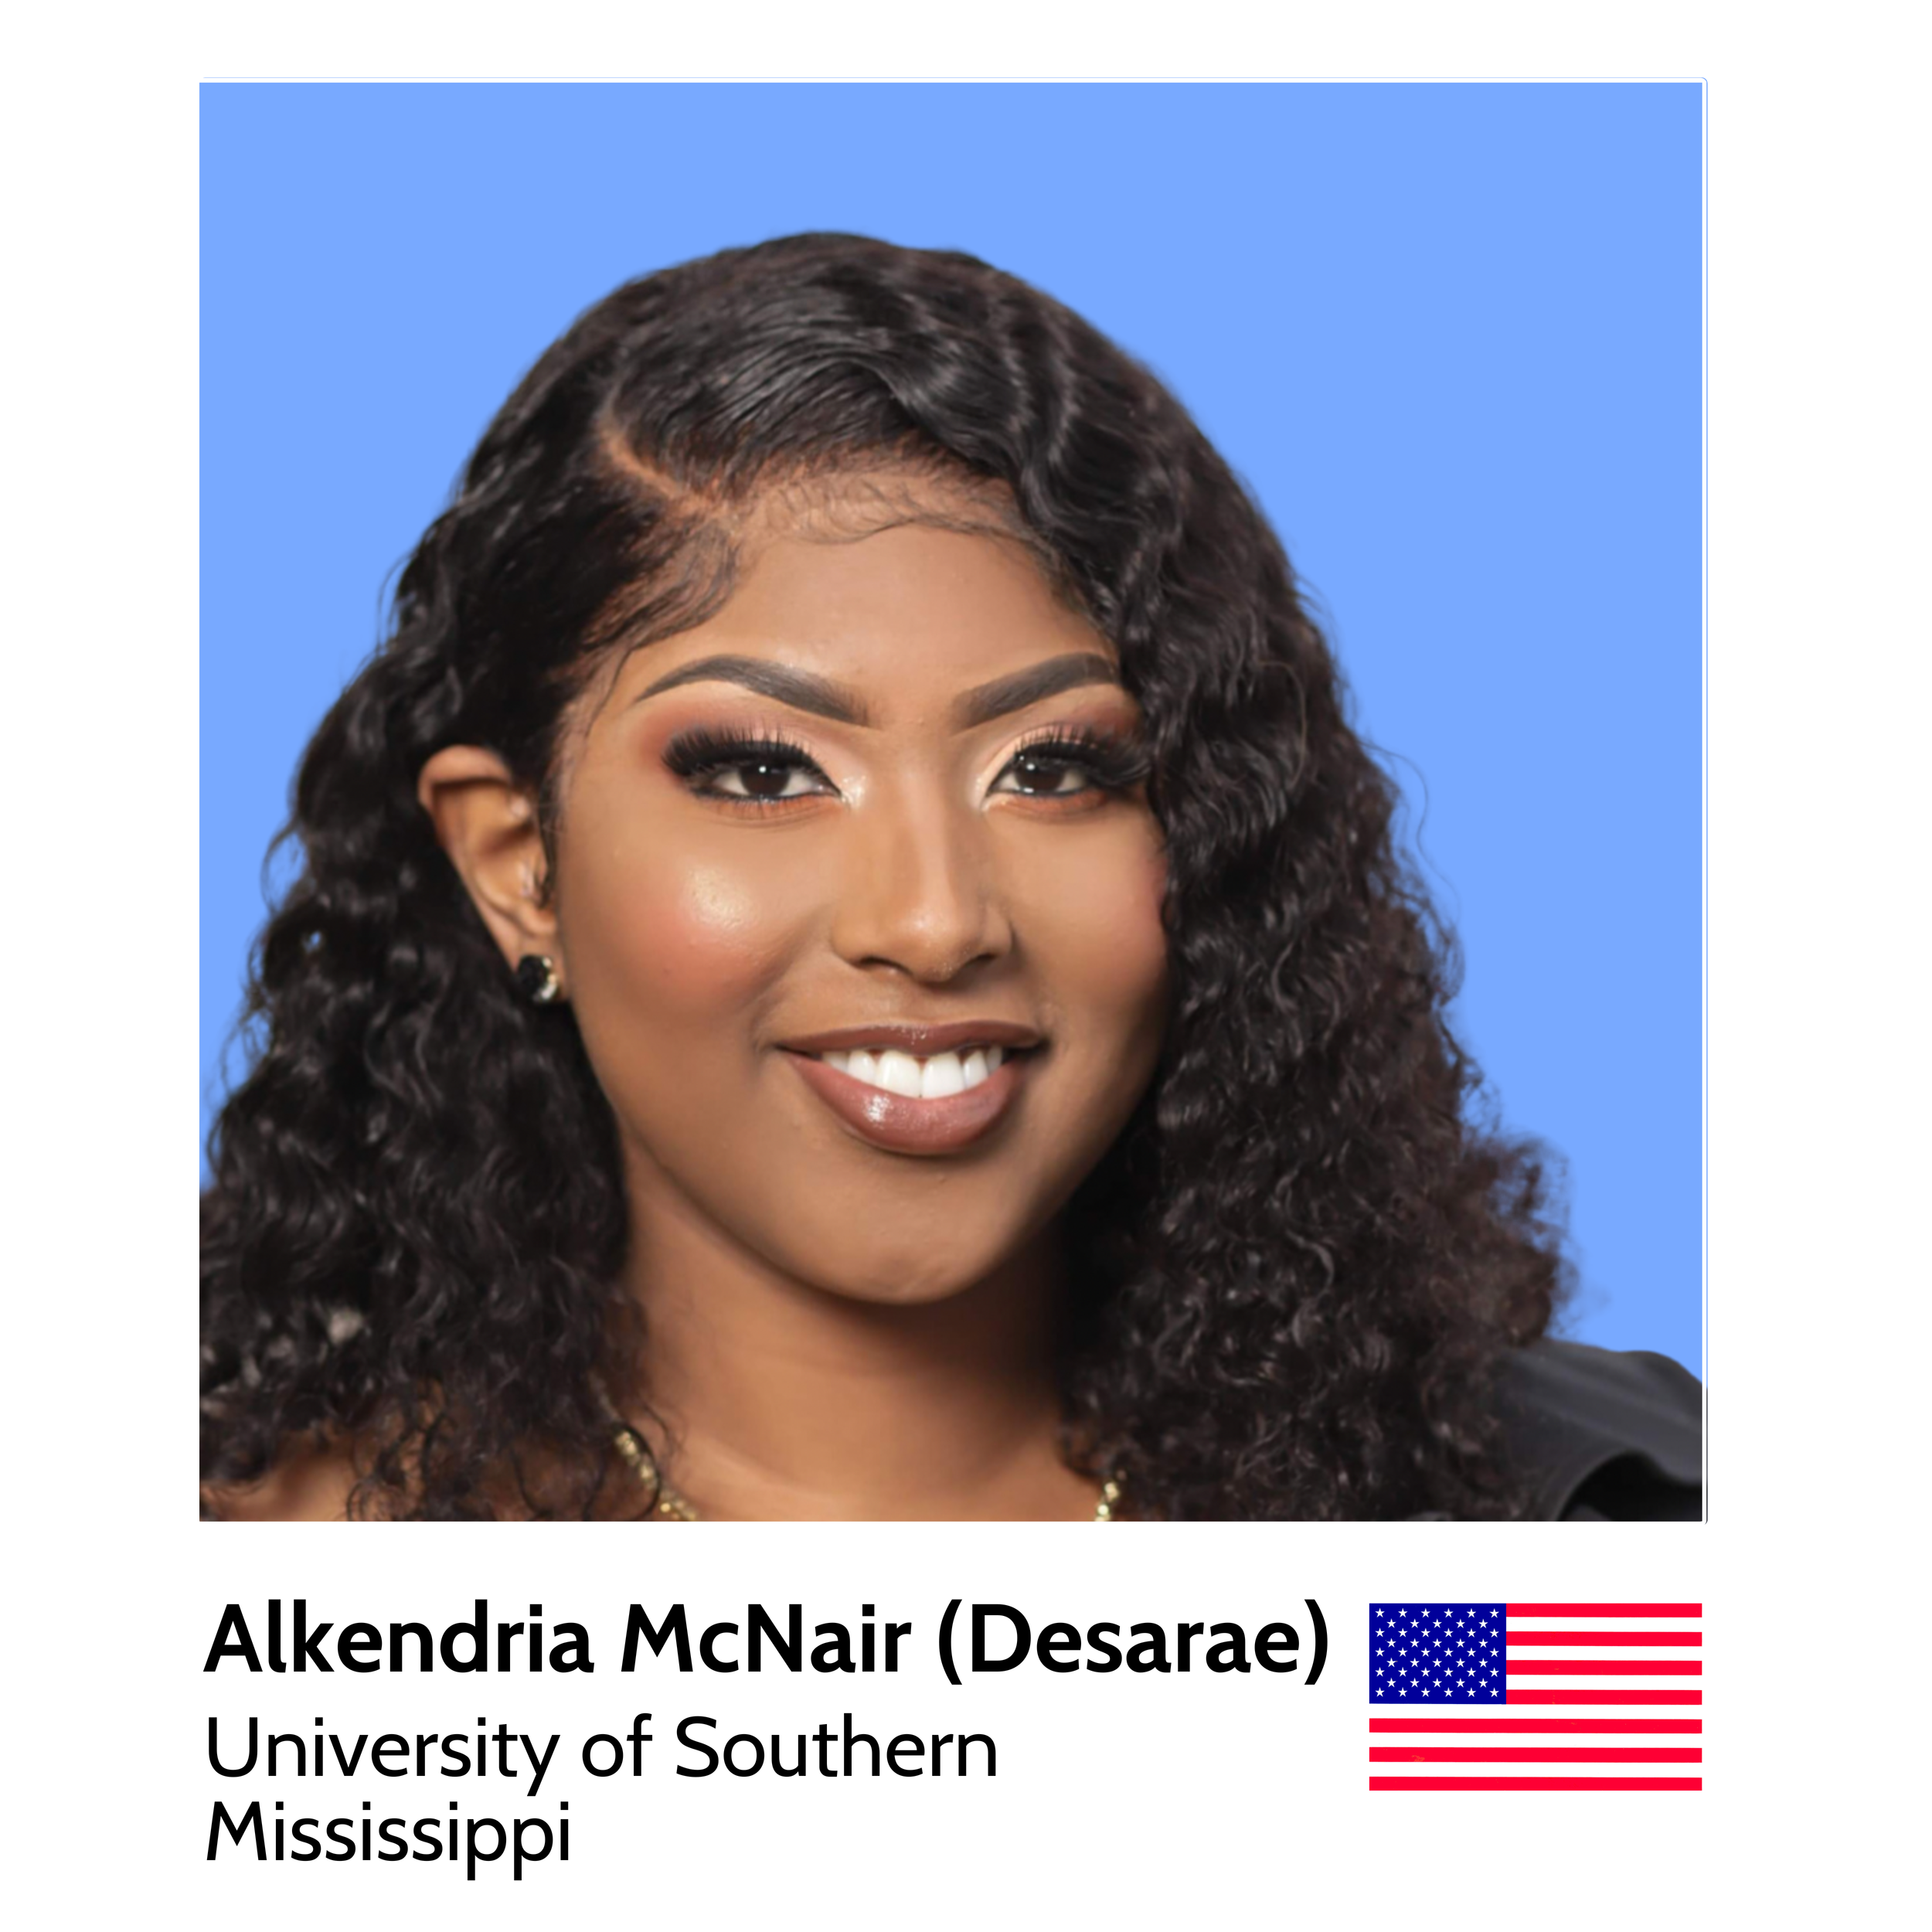 Your_Big_Year_ibm_zsystems_ambassador_alkendria_mcnair_university_of_southern_mississippi (2).png